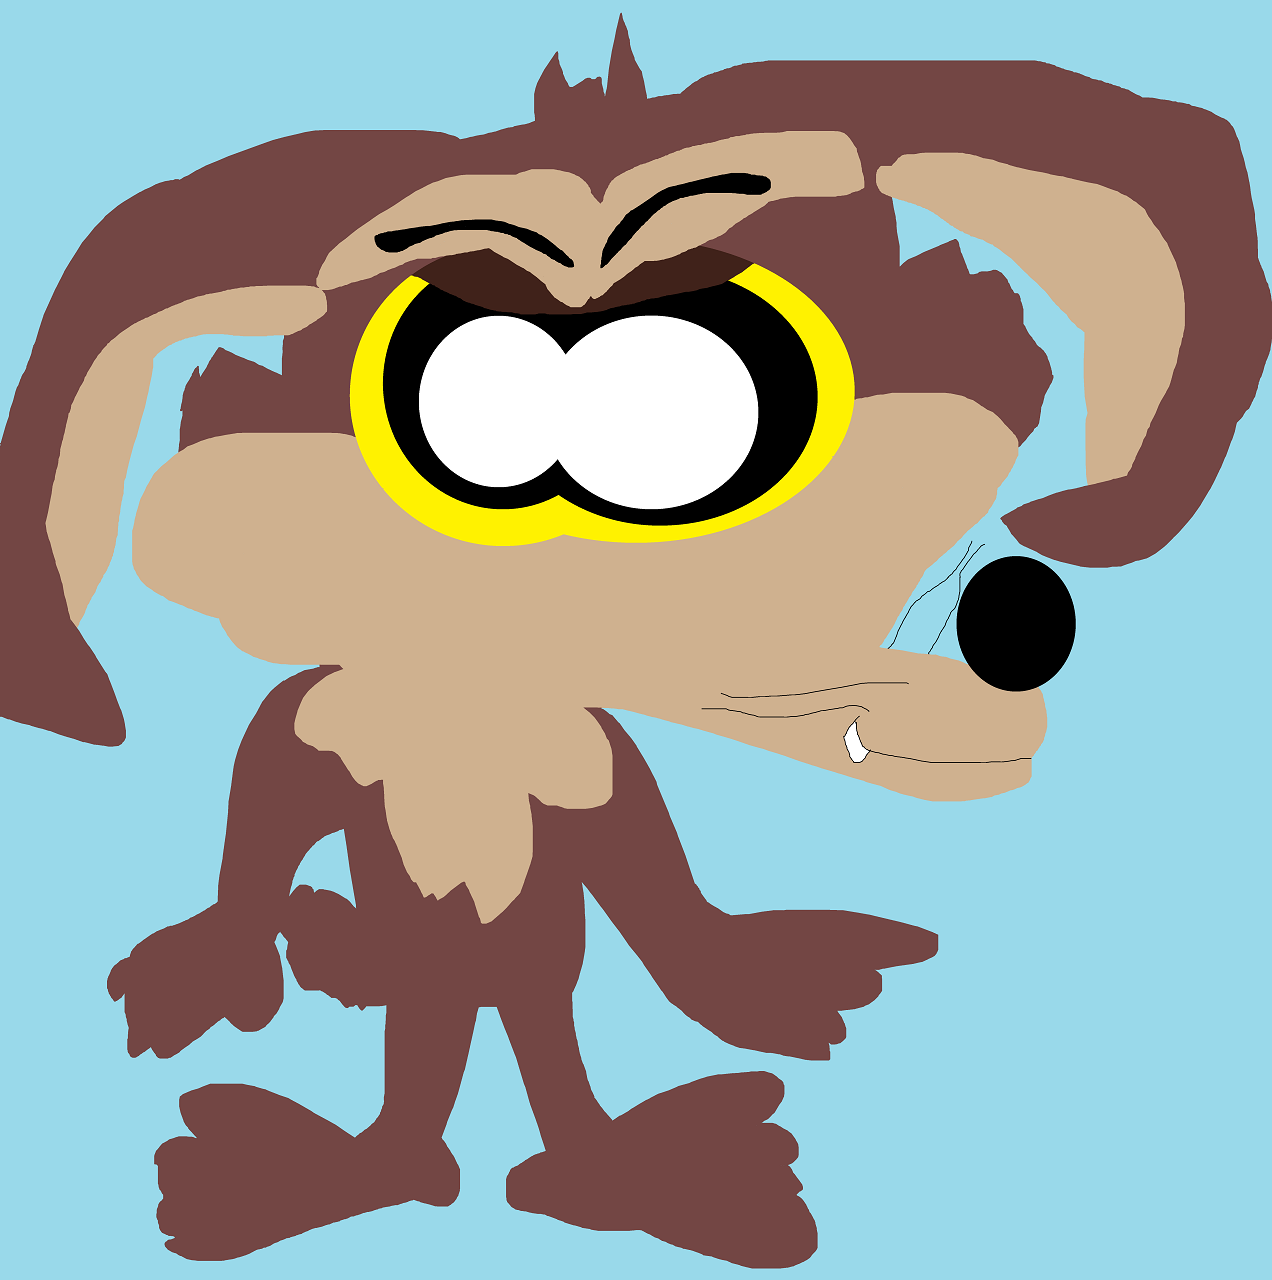 Another Chibi Wile E Coyote by Falconlobo